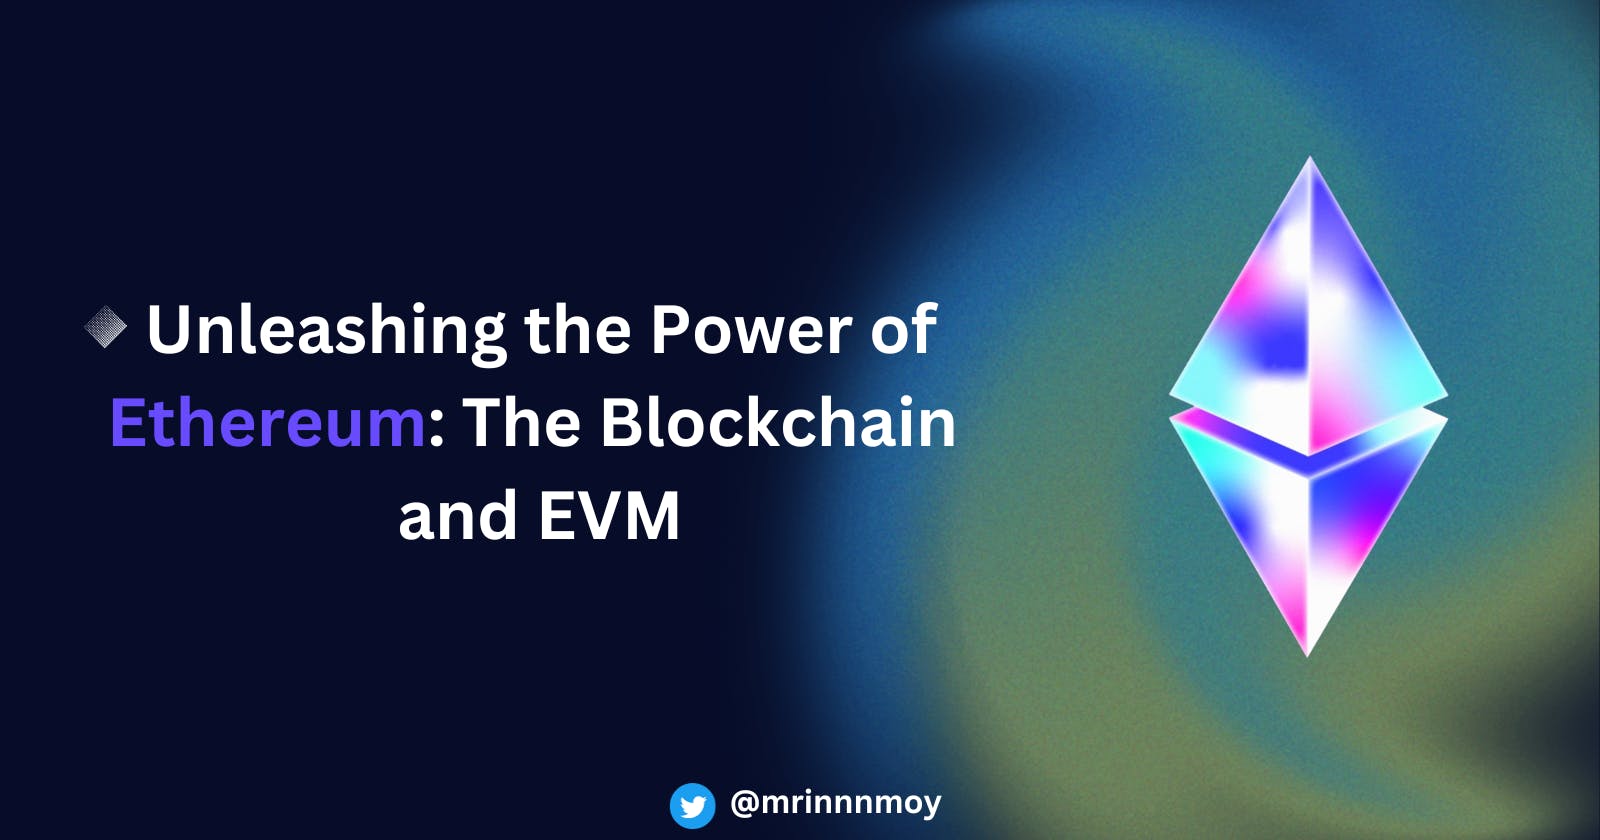 Unleashing the Power of Ethereum: The Blockchain and EVM.